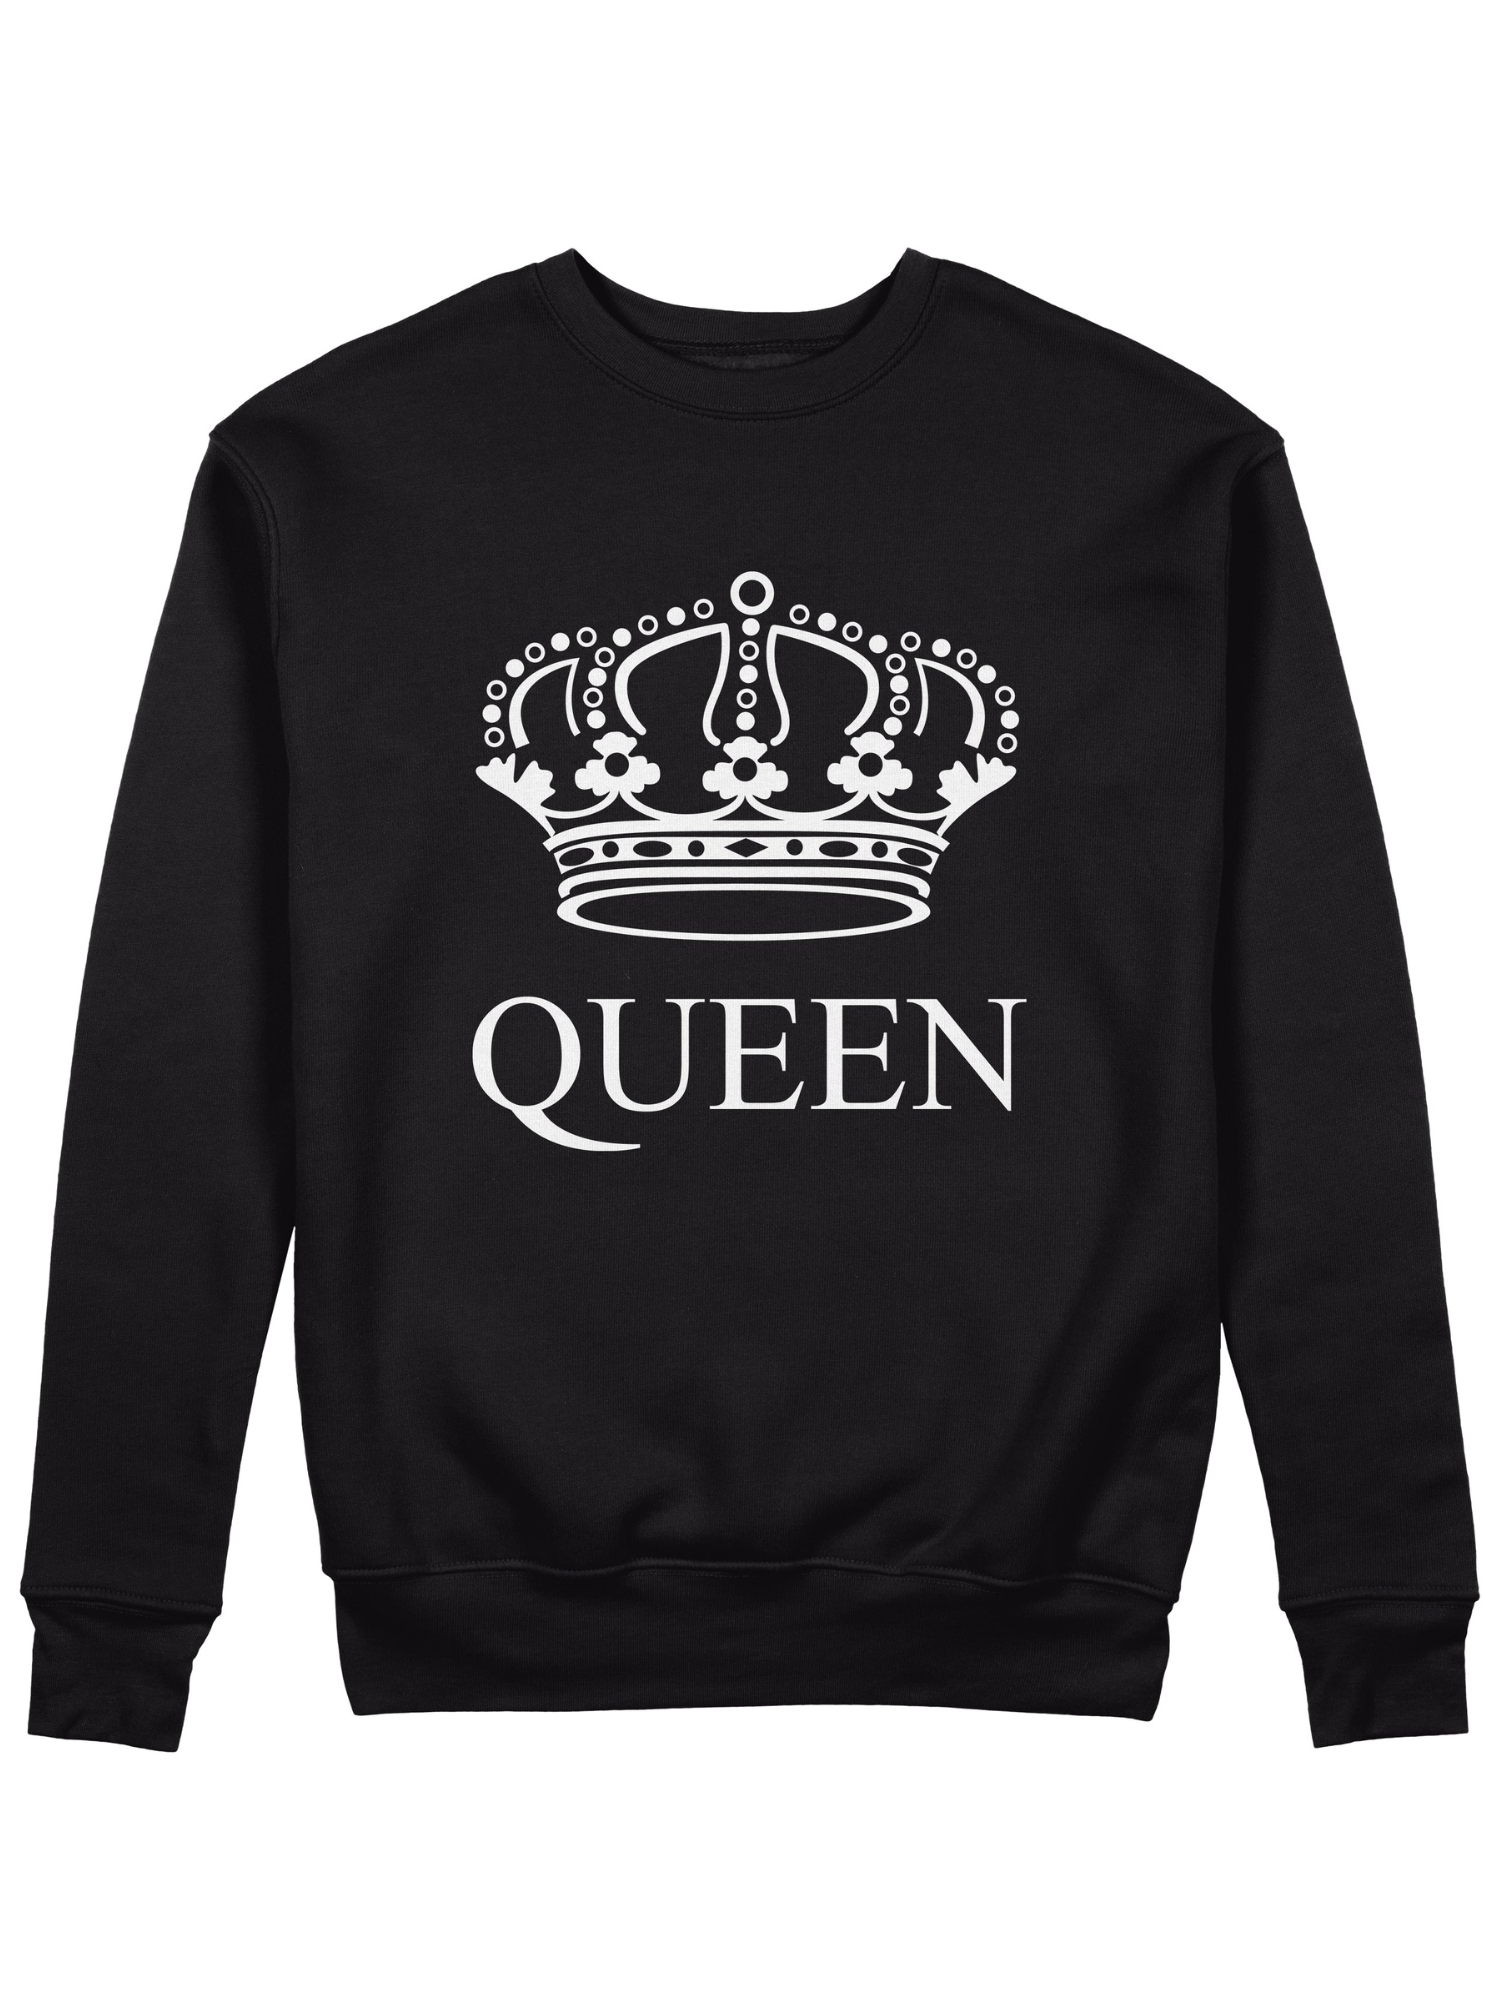 Queen Front - Sixth Degree Clothing